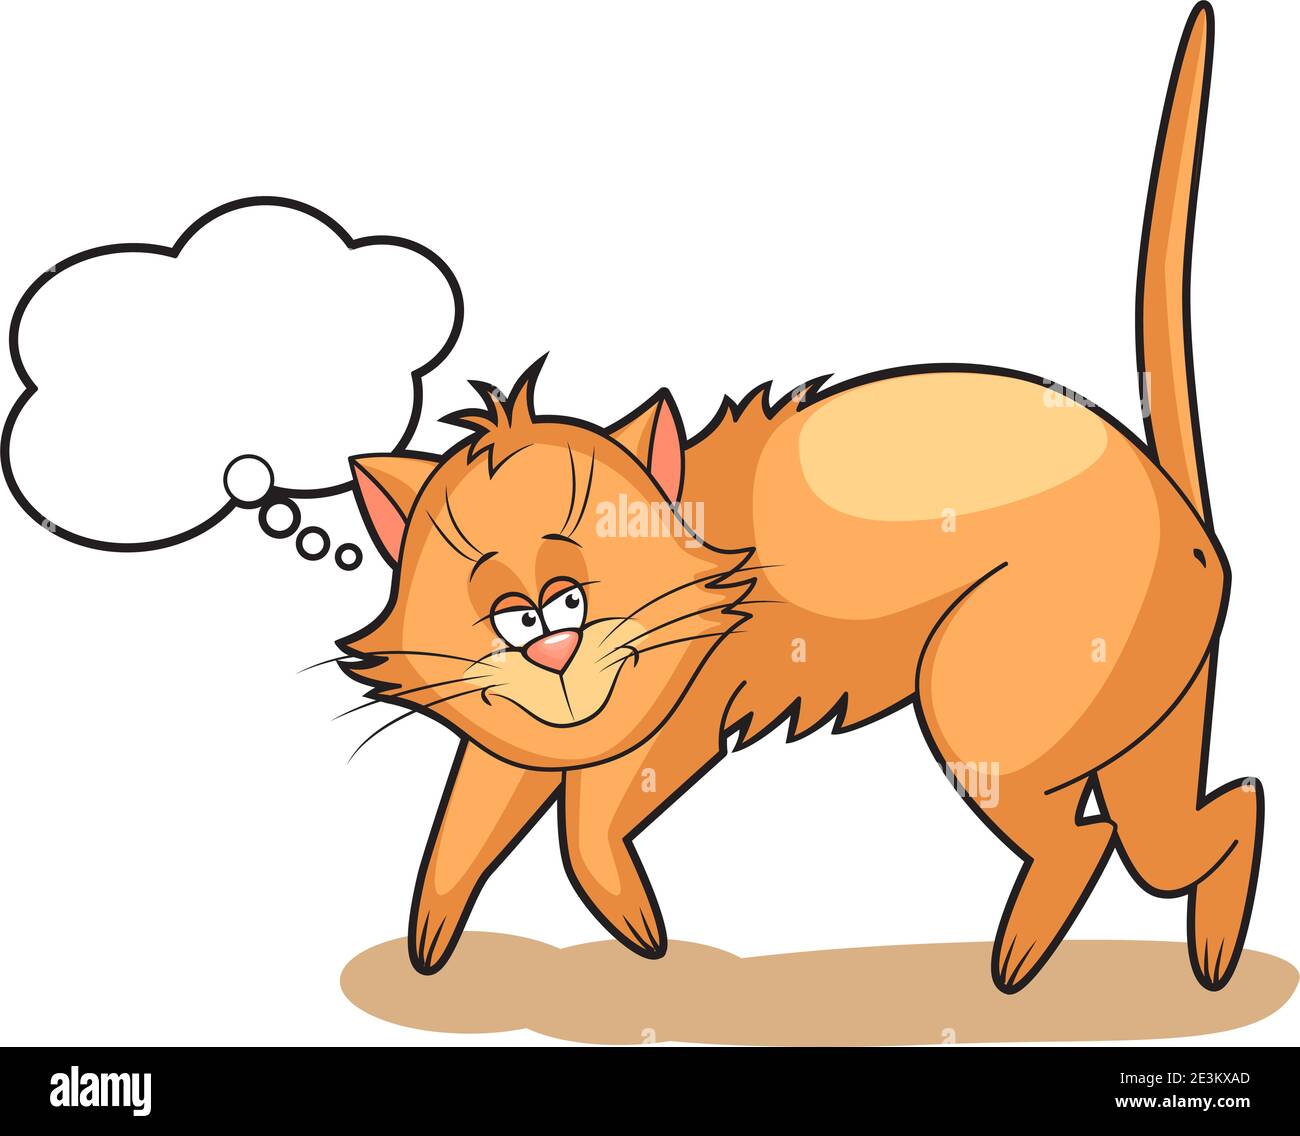 Illustration of Red Cat dreams. Cartoon Vector isolated scene. Stock Vector